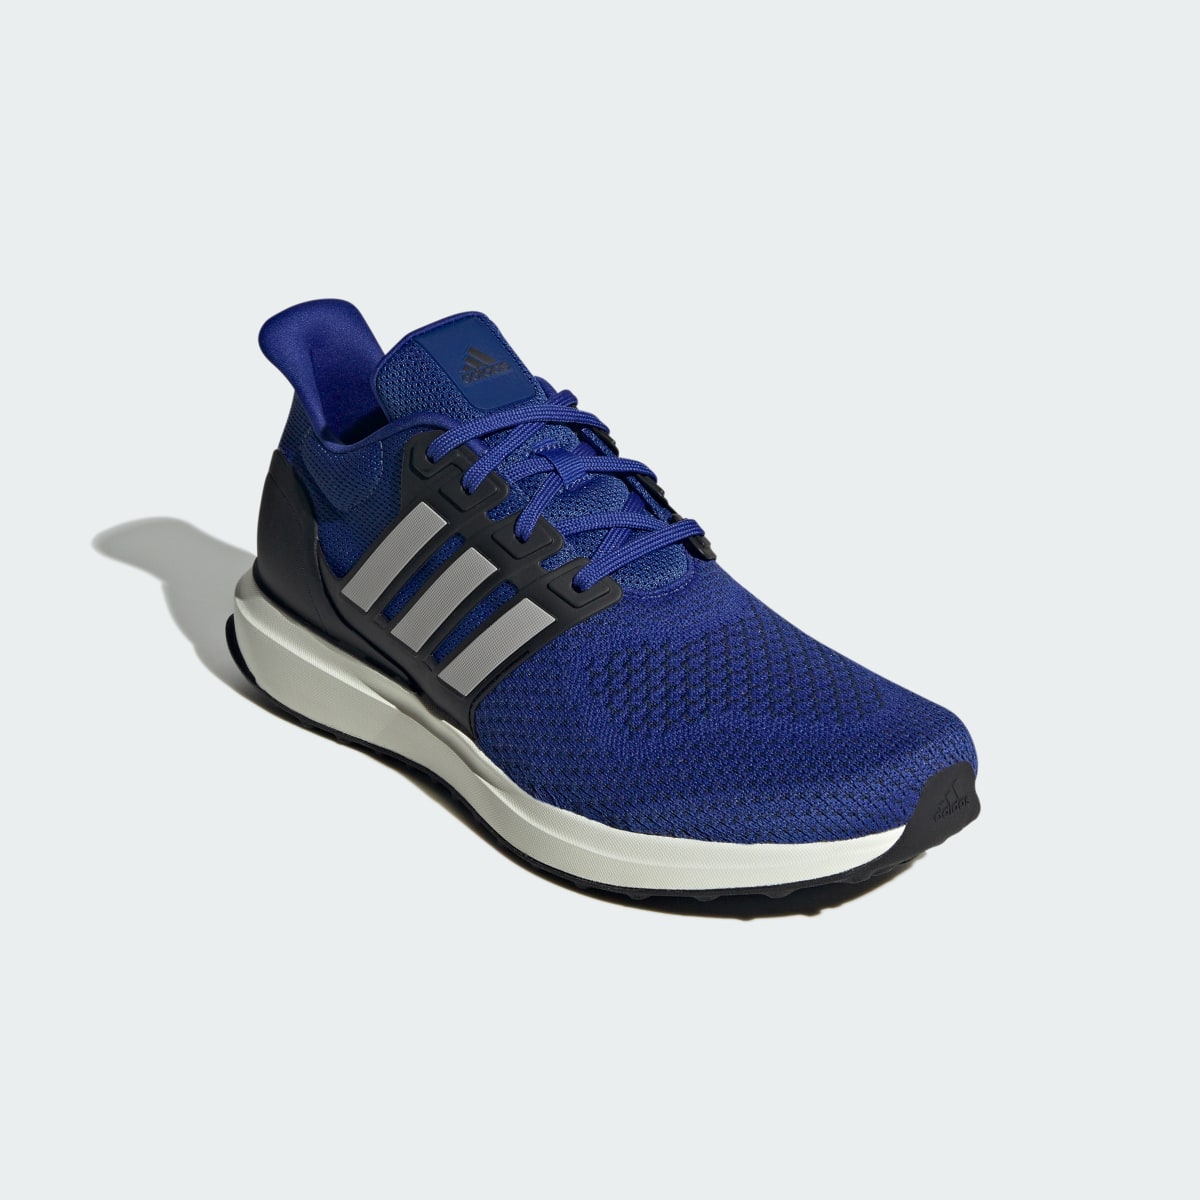 Adidas UBounce DNA Shoes. 5